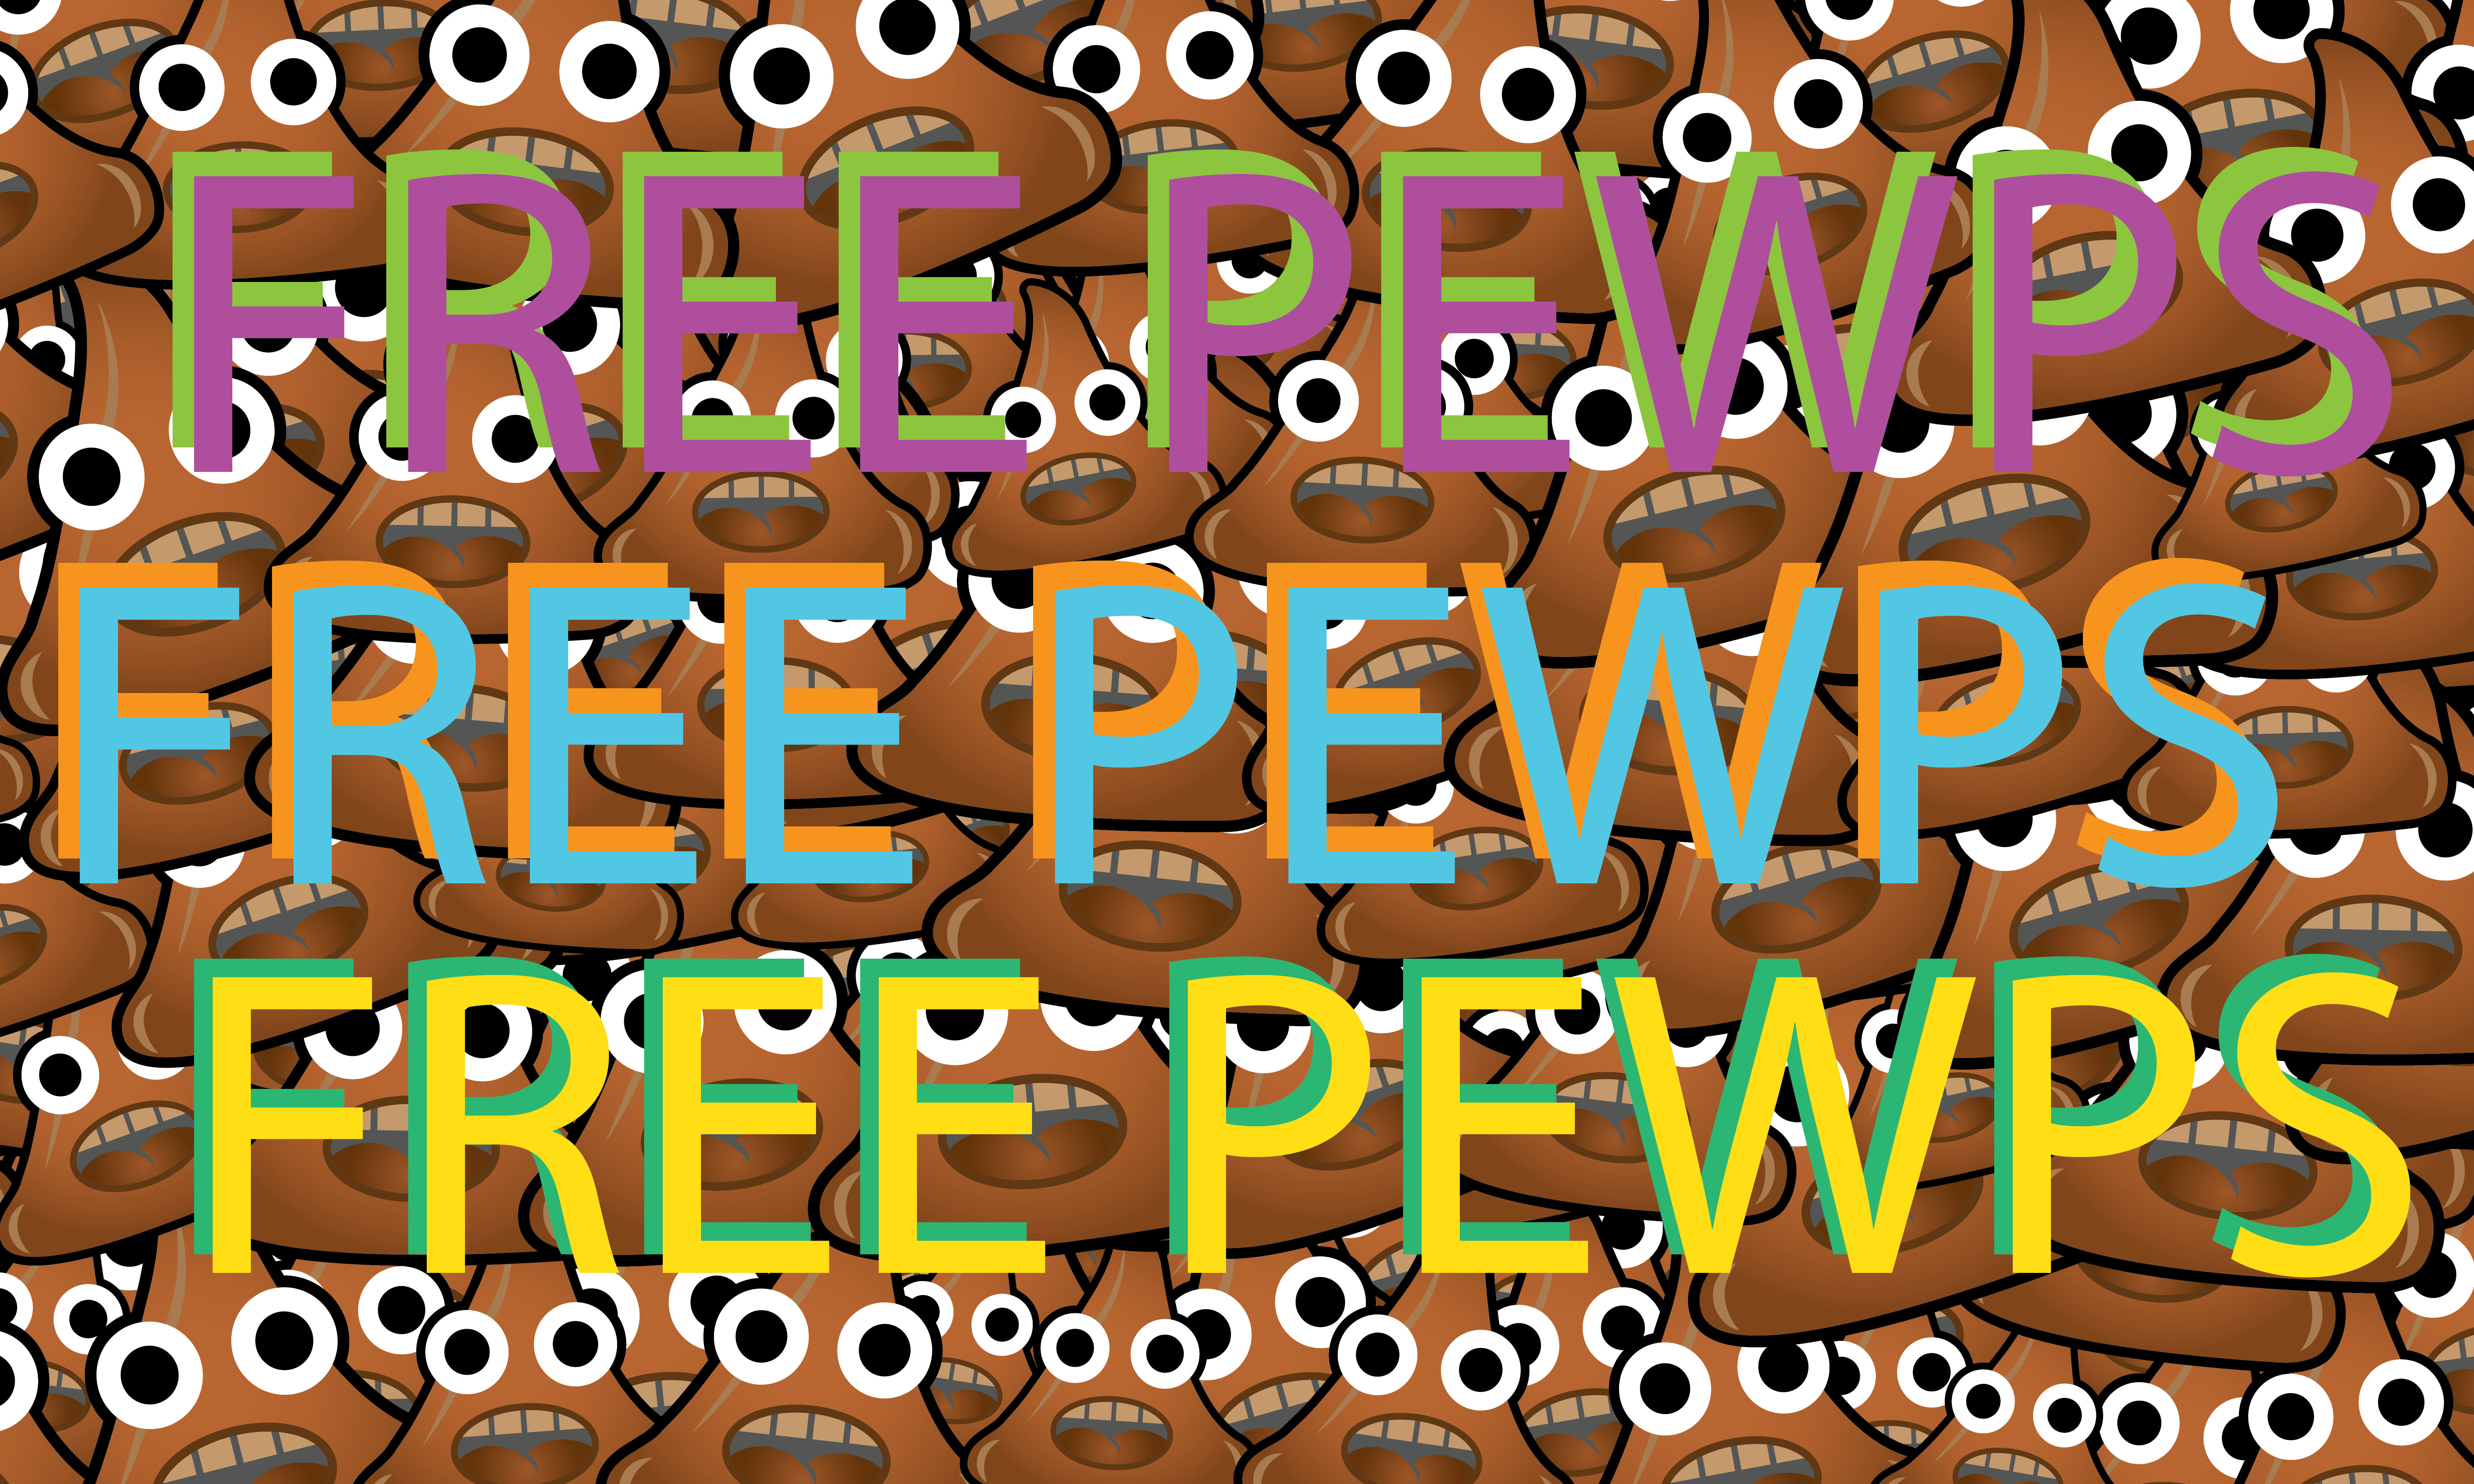 pewps for steemit-01.png